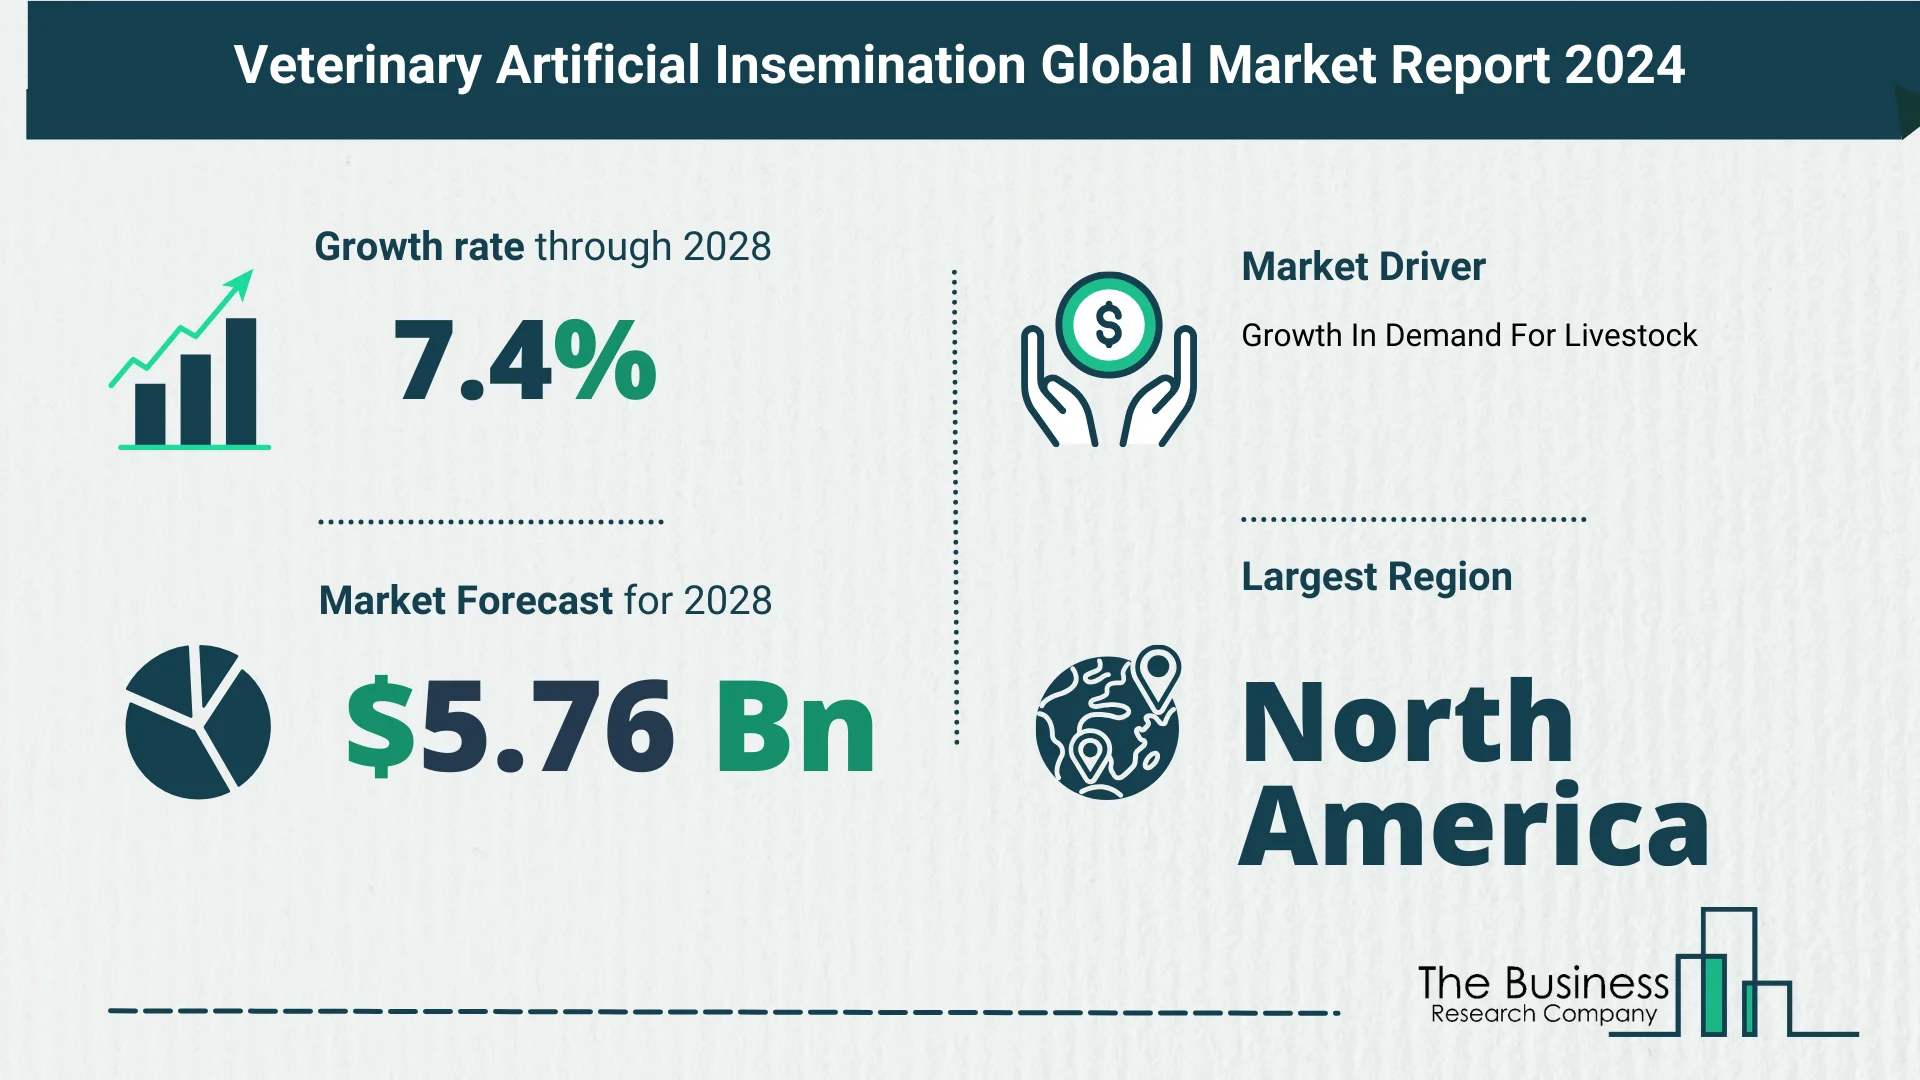 Global Veterinary Artificial Insemination Market Size